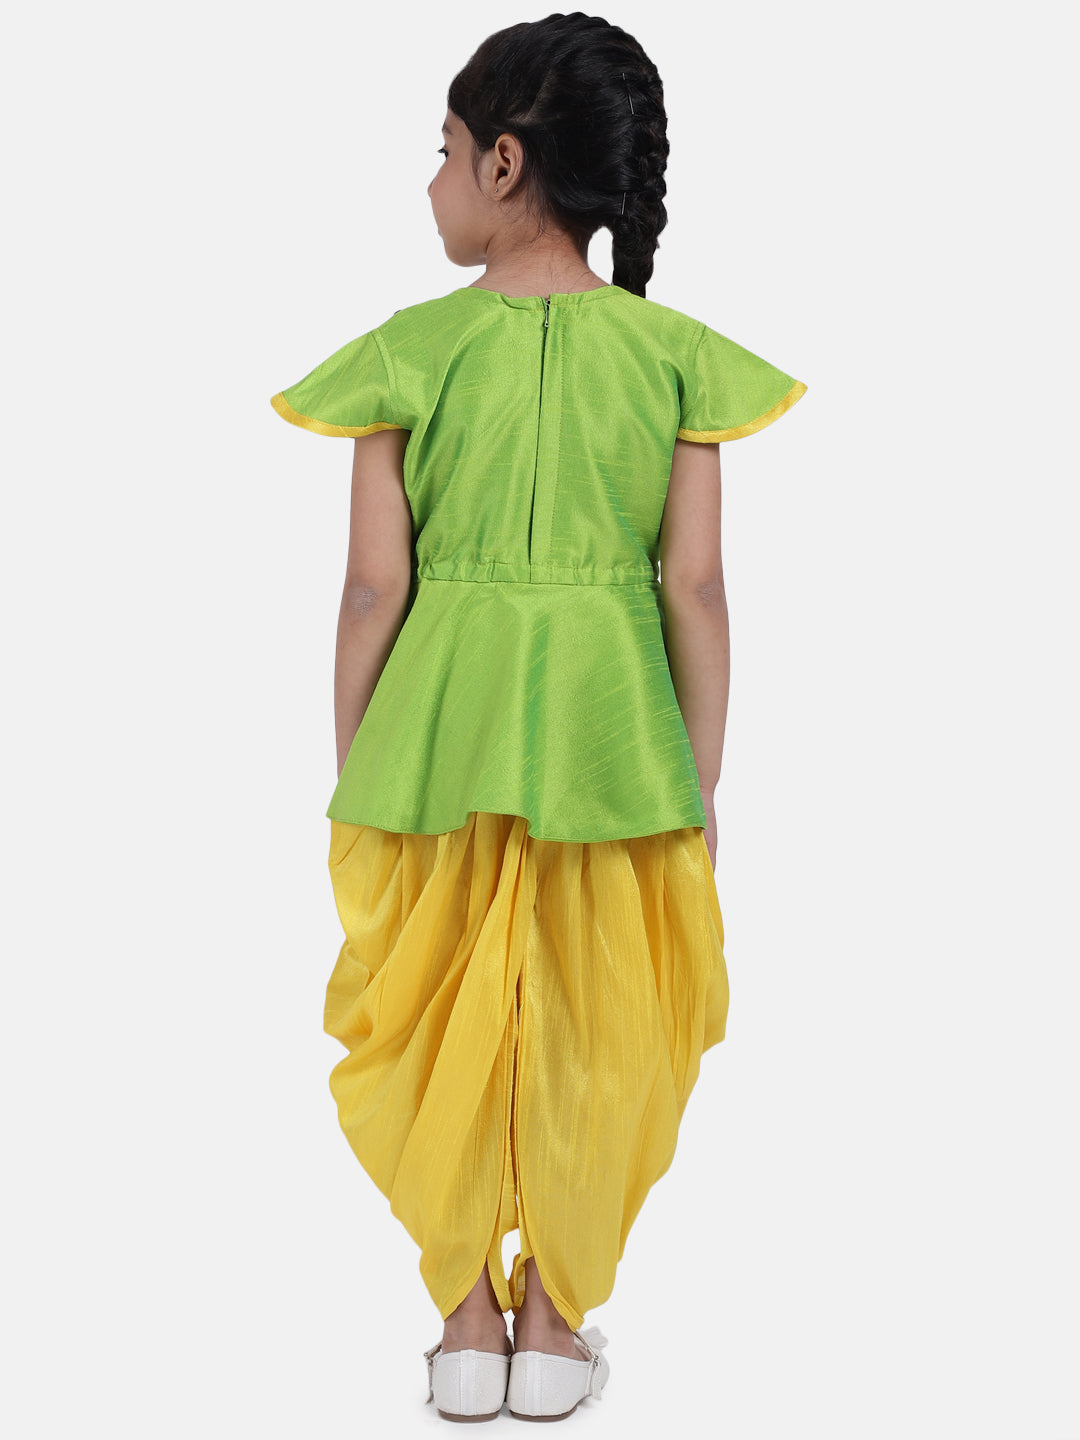 Girls Ethnic Festive wear Peacock Embroidery Peplum Dhoti Indo Western Clothing sets Green NOZ2TOZ - Made In INDIA.